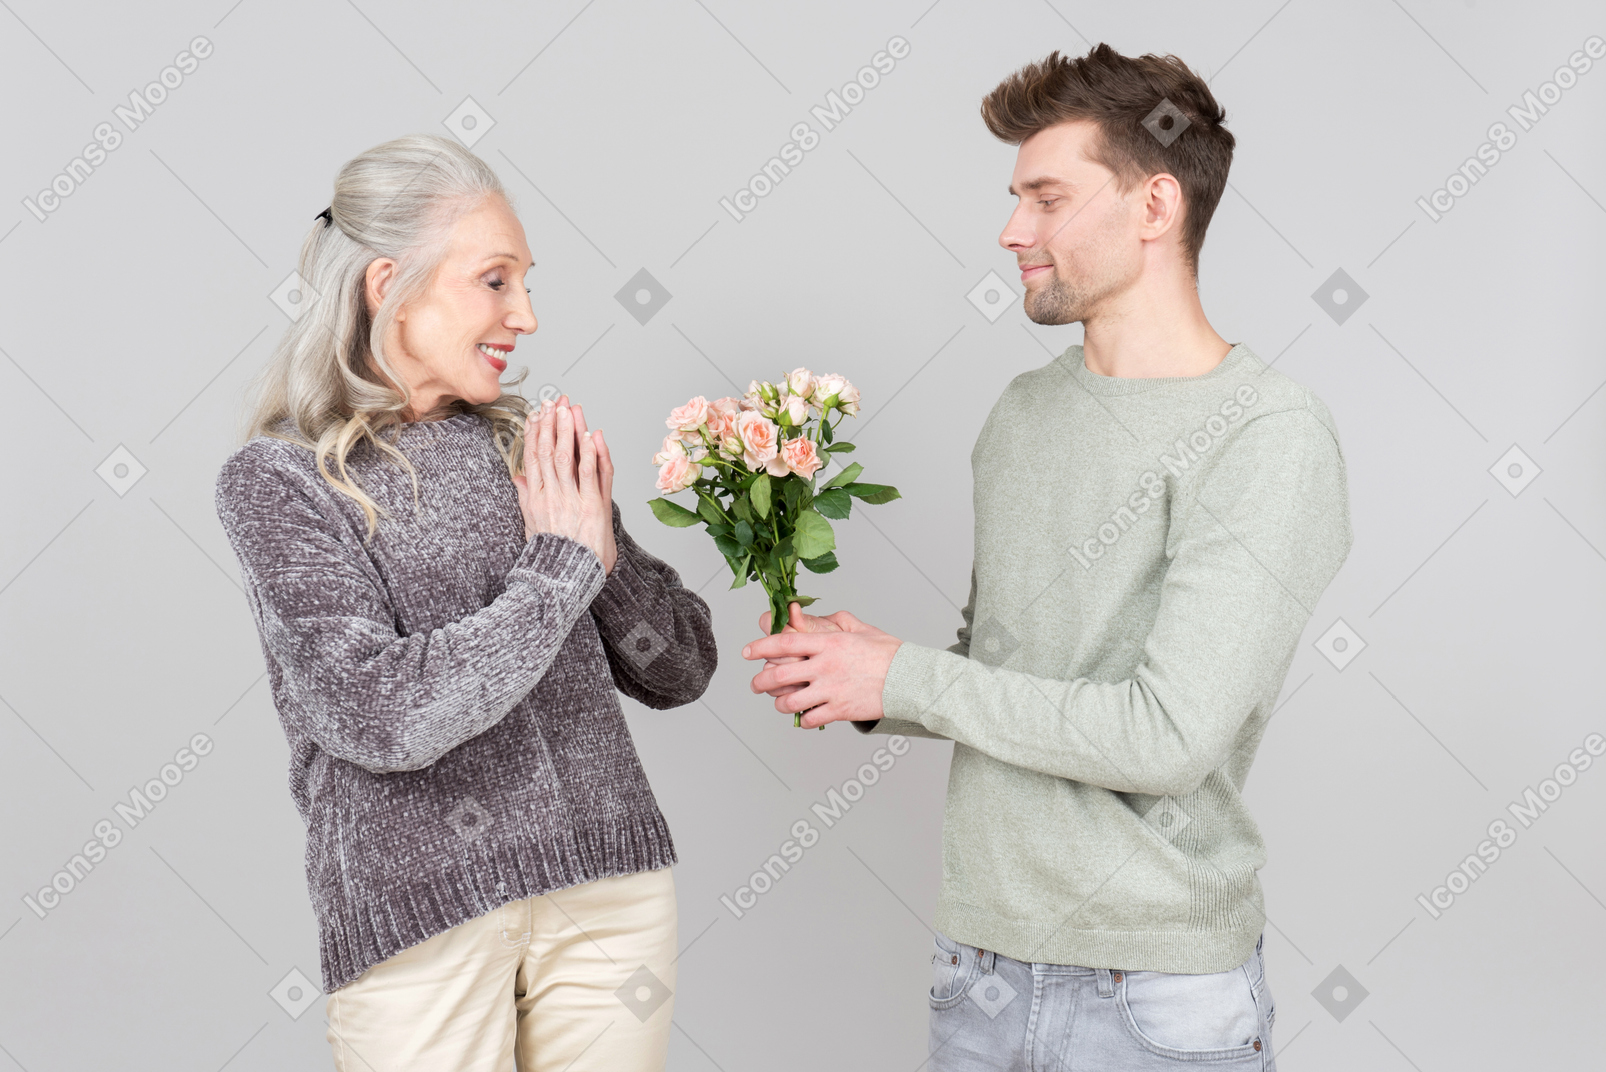 It's so sweet of you to bring me flowers